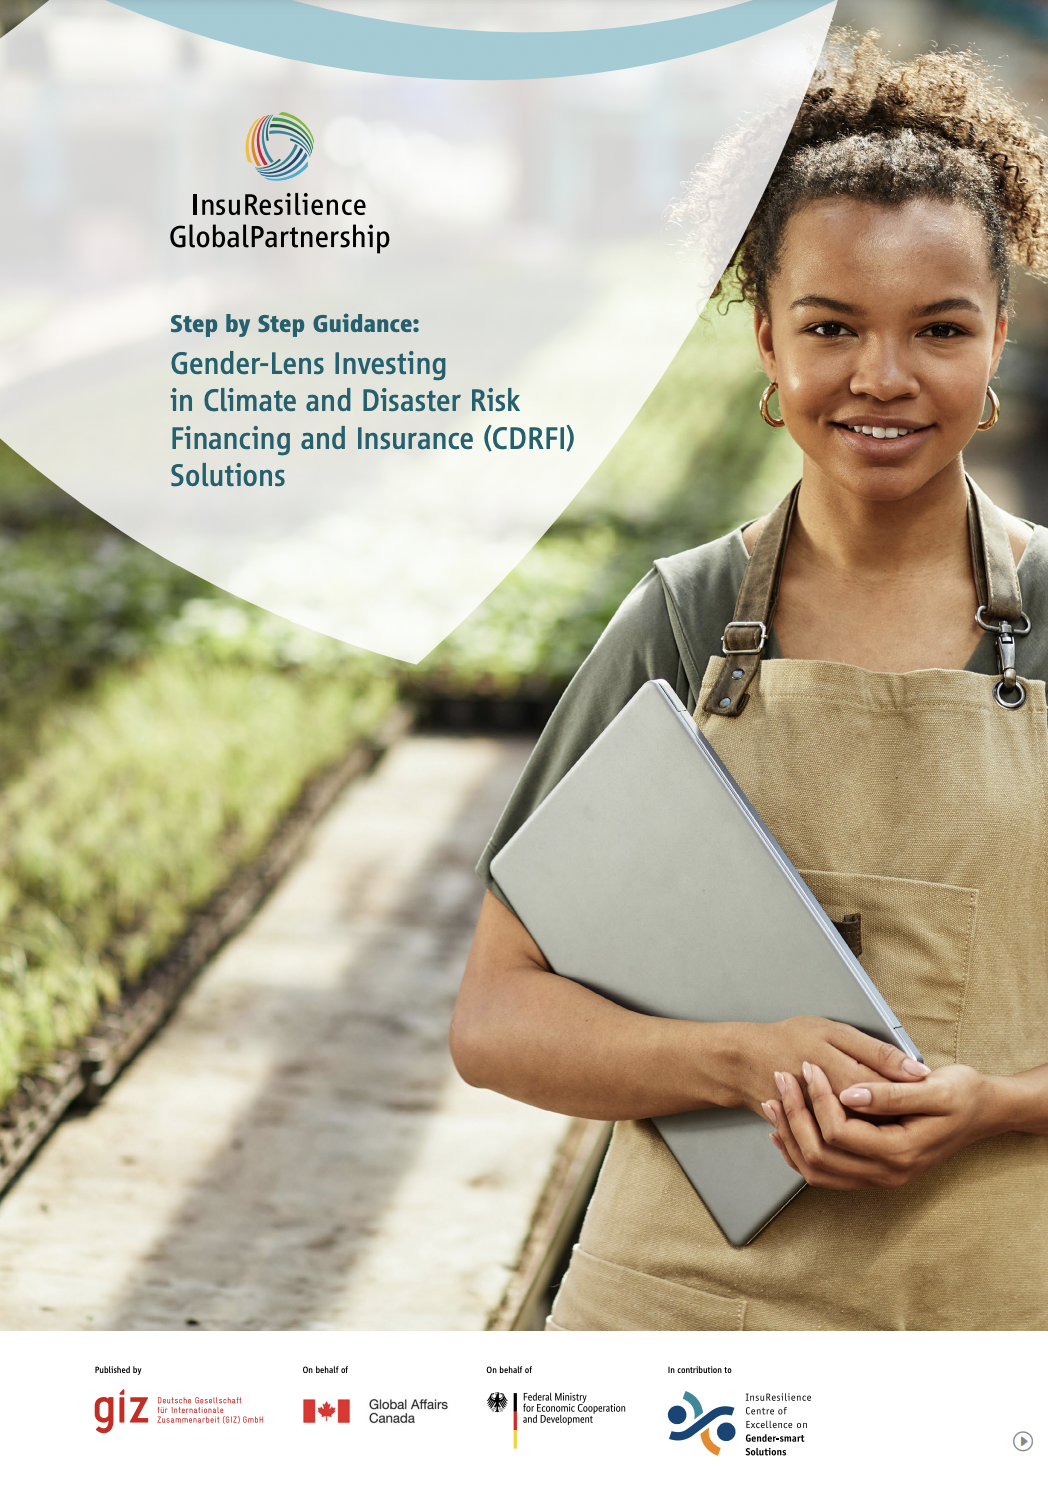 Step by Step Guidance: Gender-Lens Investing in Climate and Disaster Risk Financing and Insurance (CDRFI) Solutions